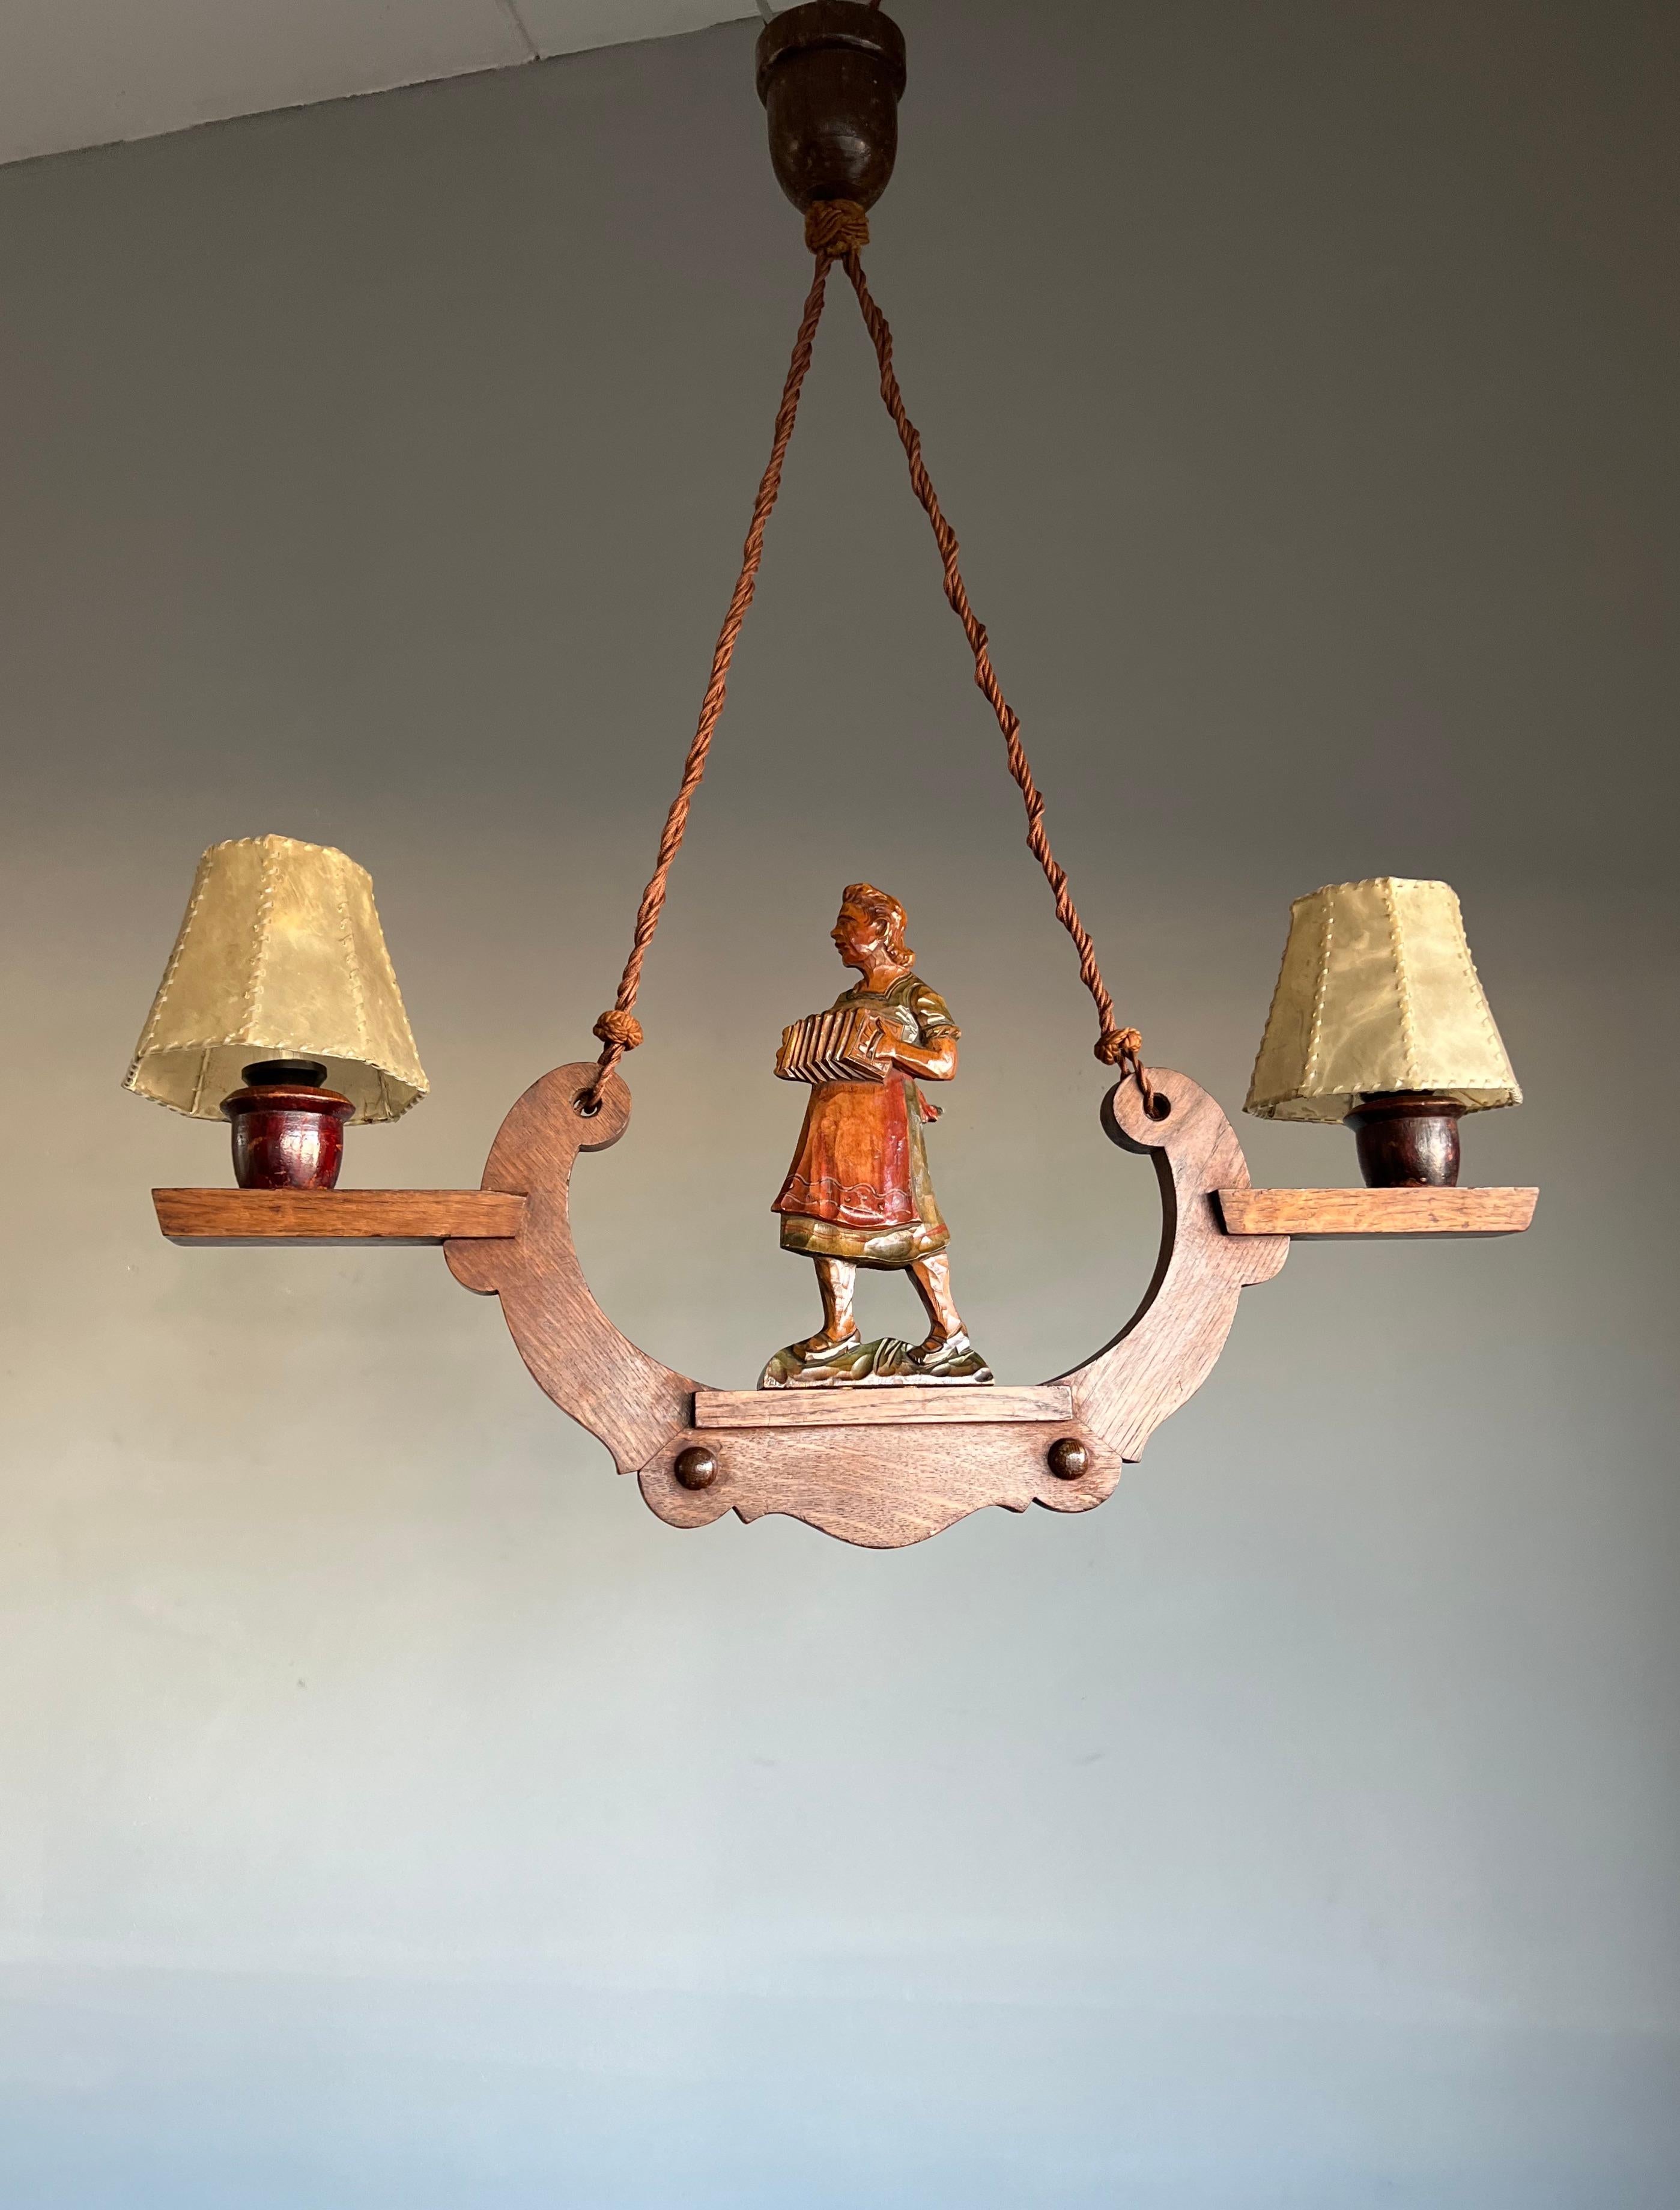 Rare and beautifully handcrafted Arts & Crafts light fixture for black forest enthousiasts.

If you are looking for unique antiques that tell something about life in different parts of the world AND that bring a smile to your face then this typical